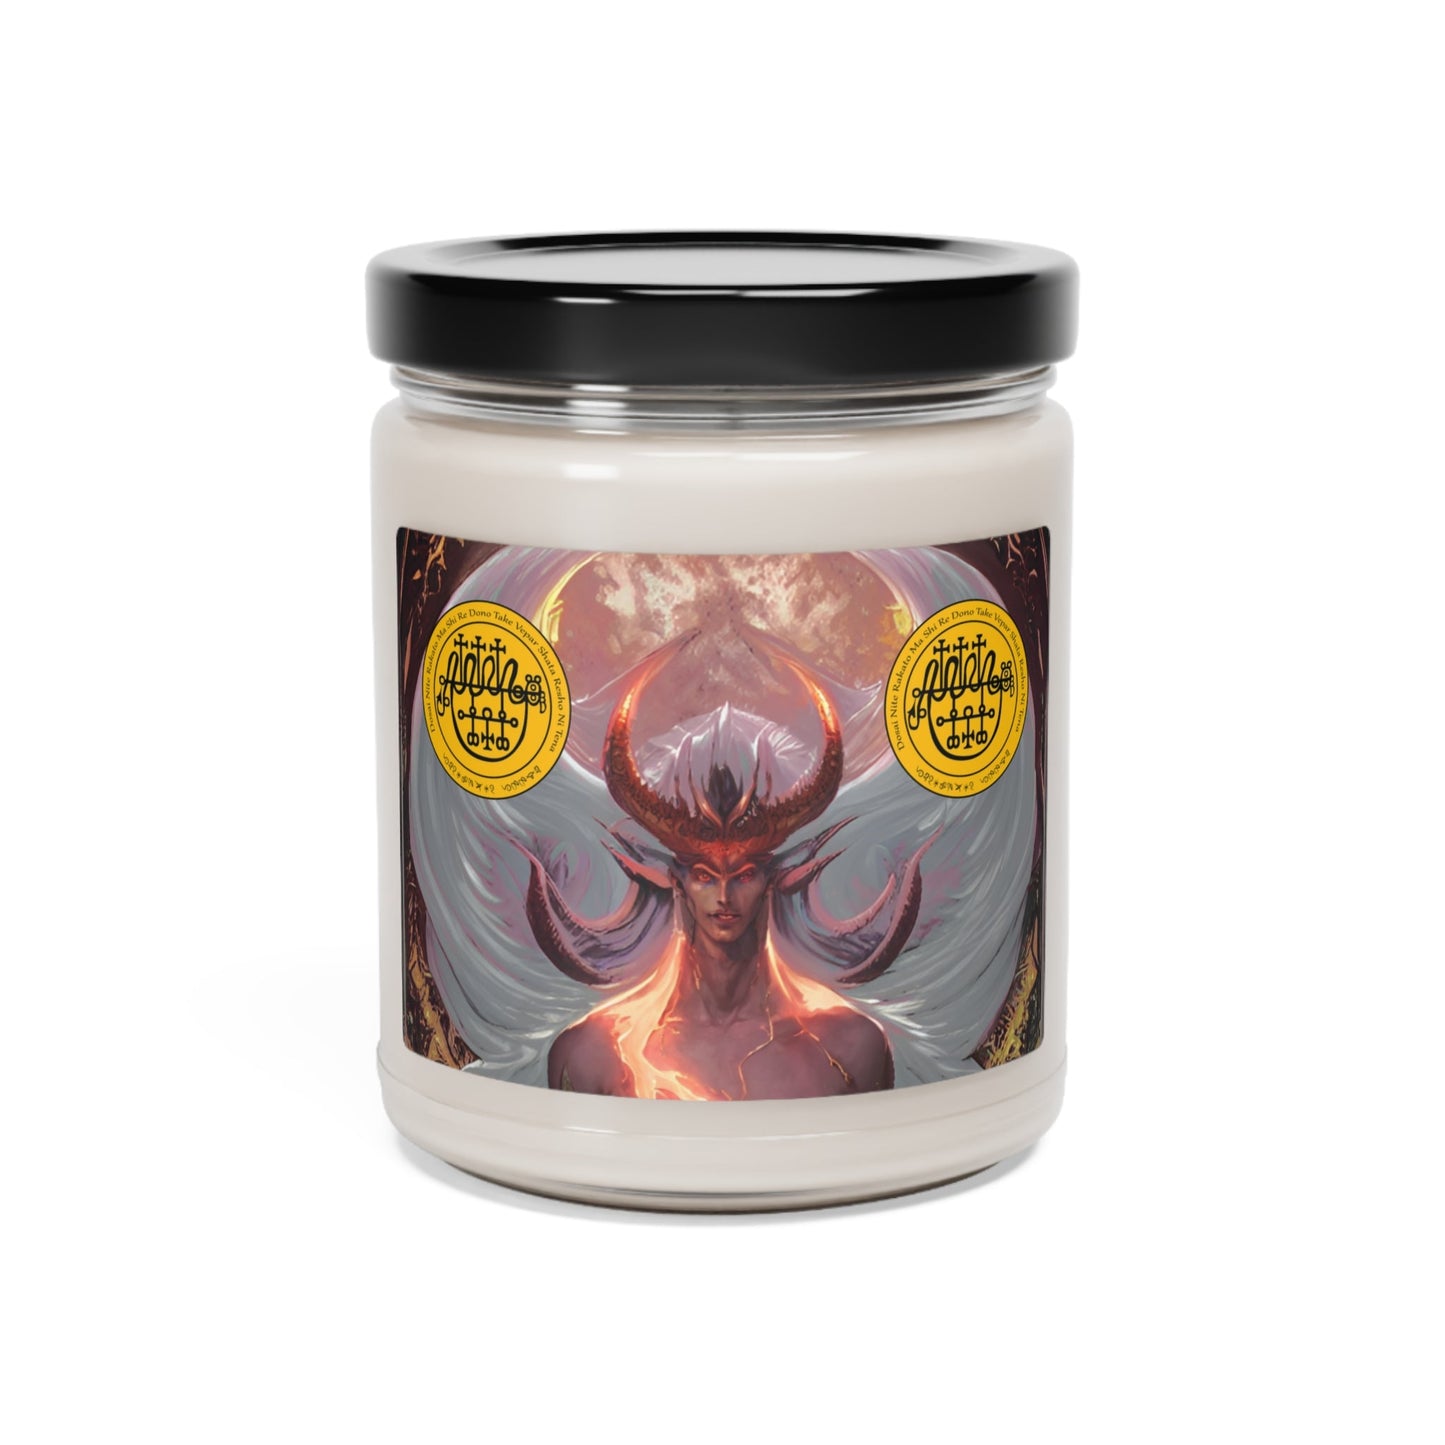 Demon-Vepar-Altar-Scented-Soy-Candle-for-offerings-rituals-initiations-o-praying-and-medtation-6